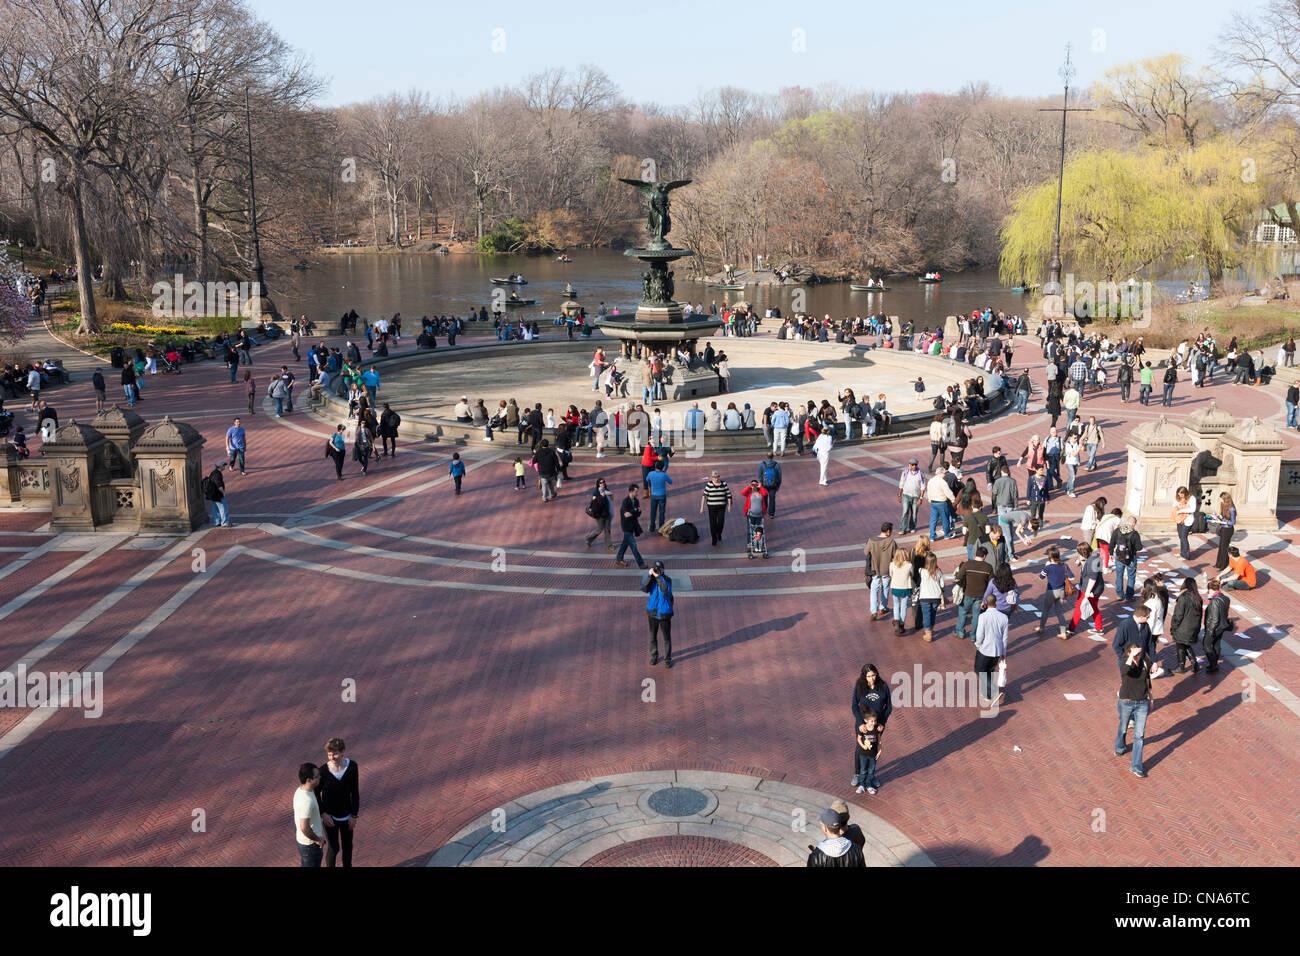 People enjoy the area around Bethesda Fountain in Central Park on a warm late winter day in New York City. Stock Photo